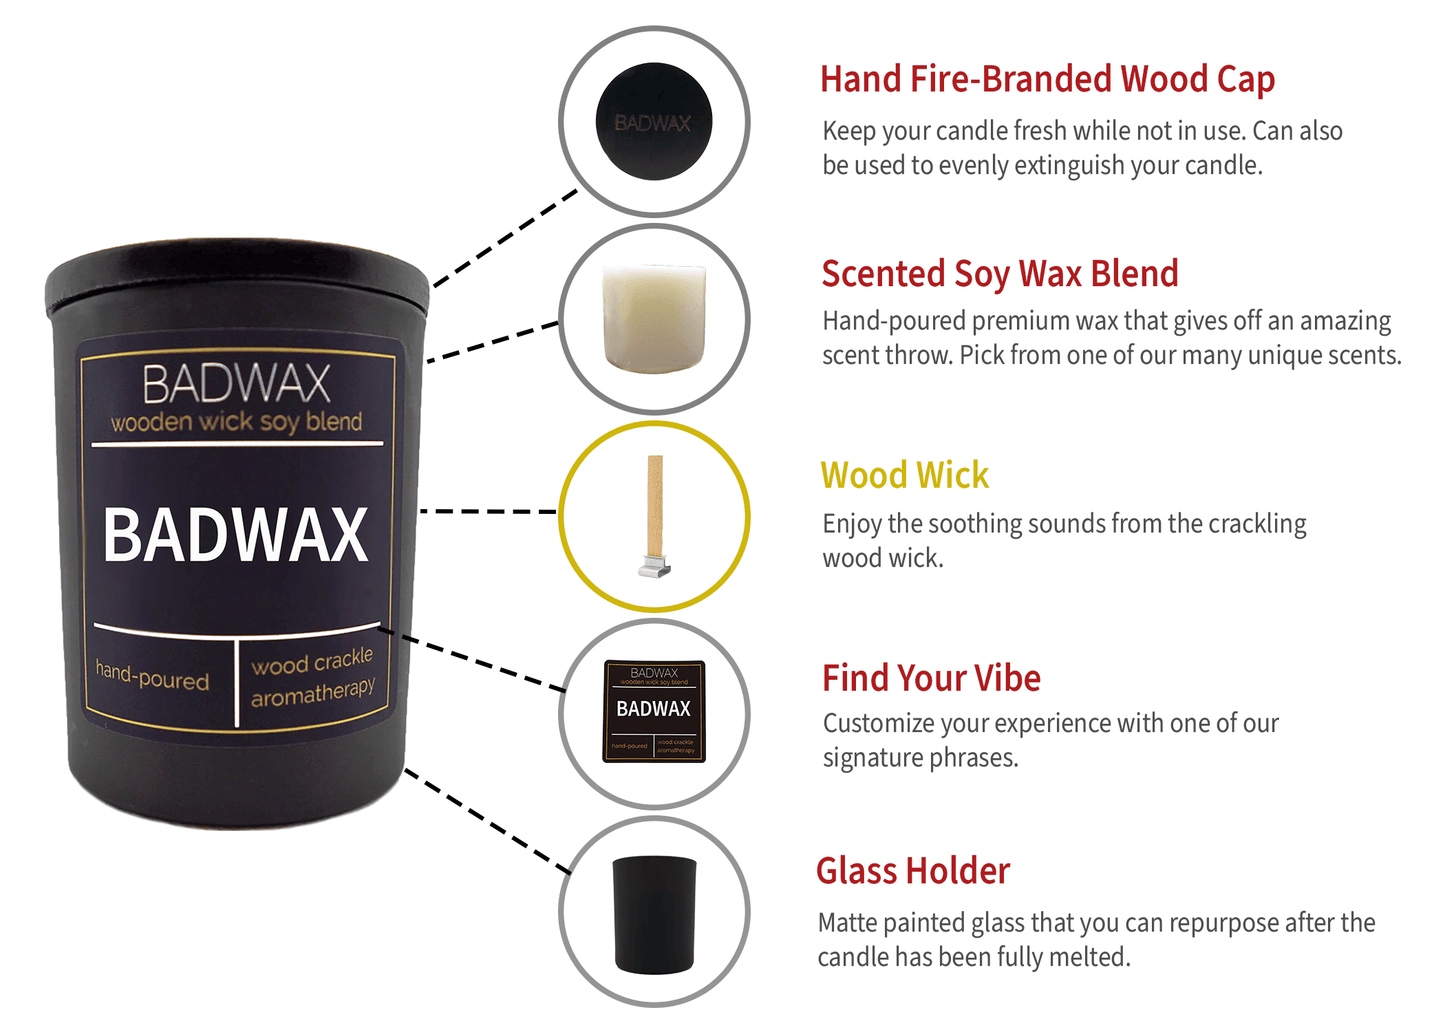 Hot & Bothered - Woodwick Candle - BADWAX